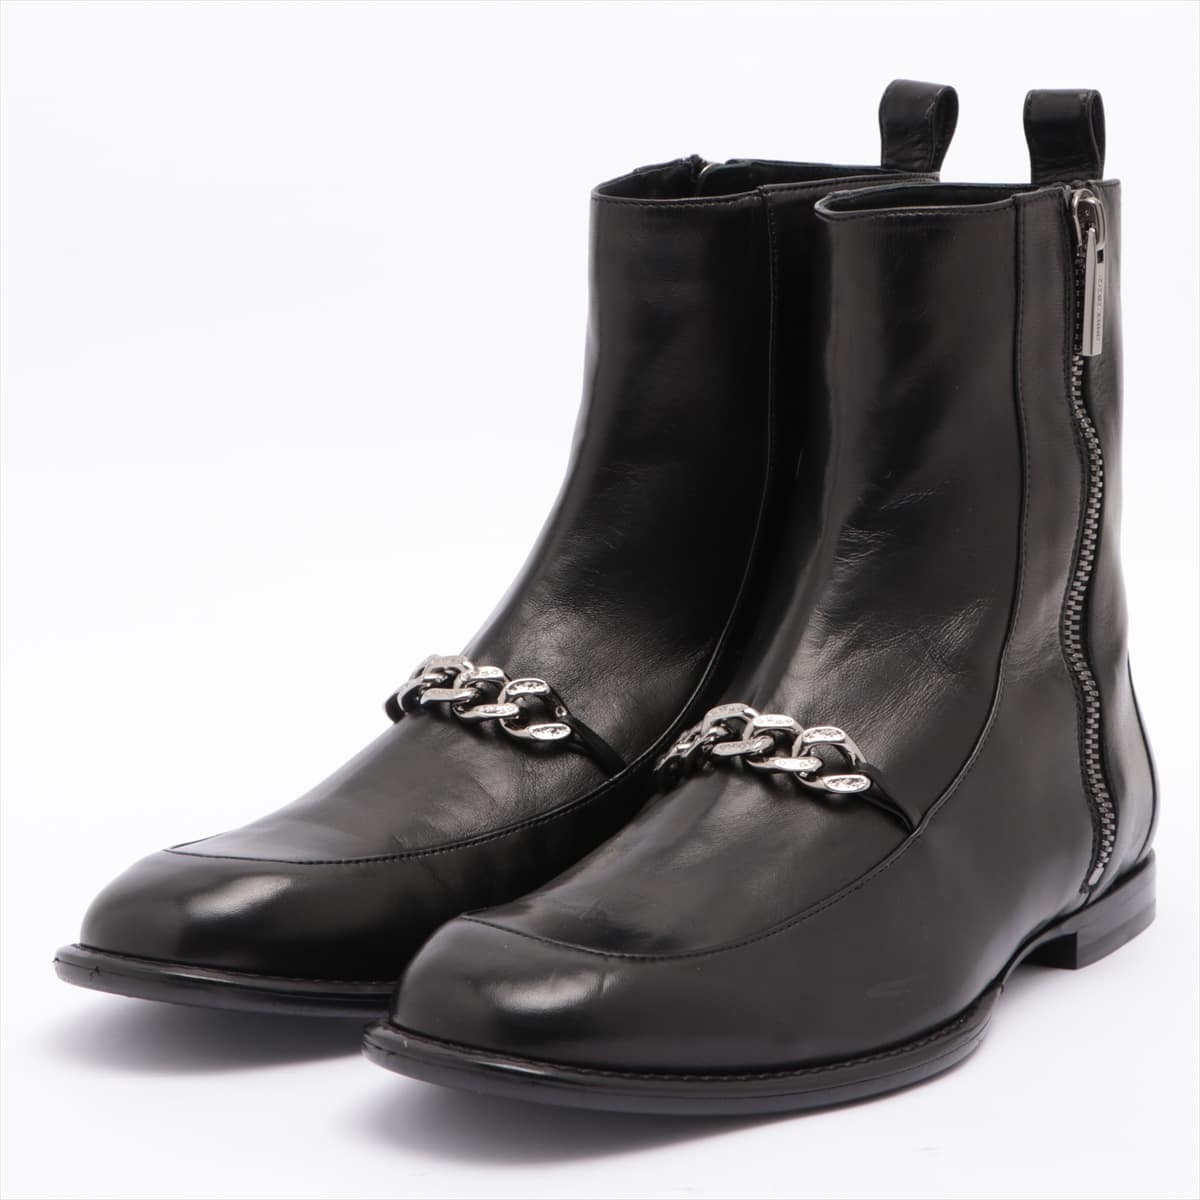 Jimmy Choo 21AW Leather Boots 43 Men's Black MILLER star cube Chain